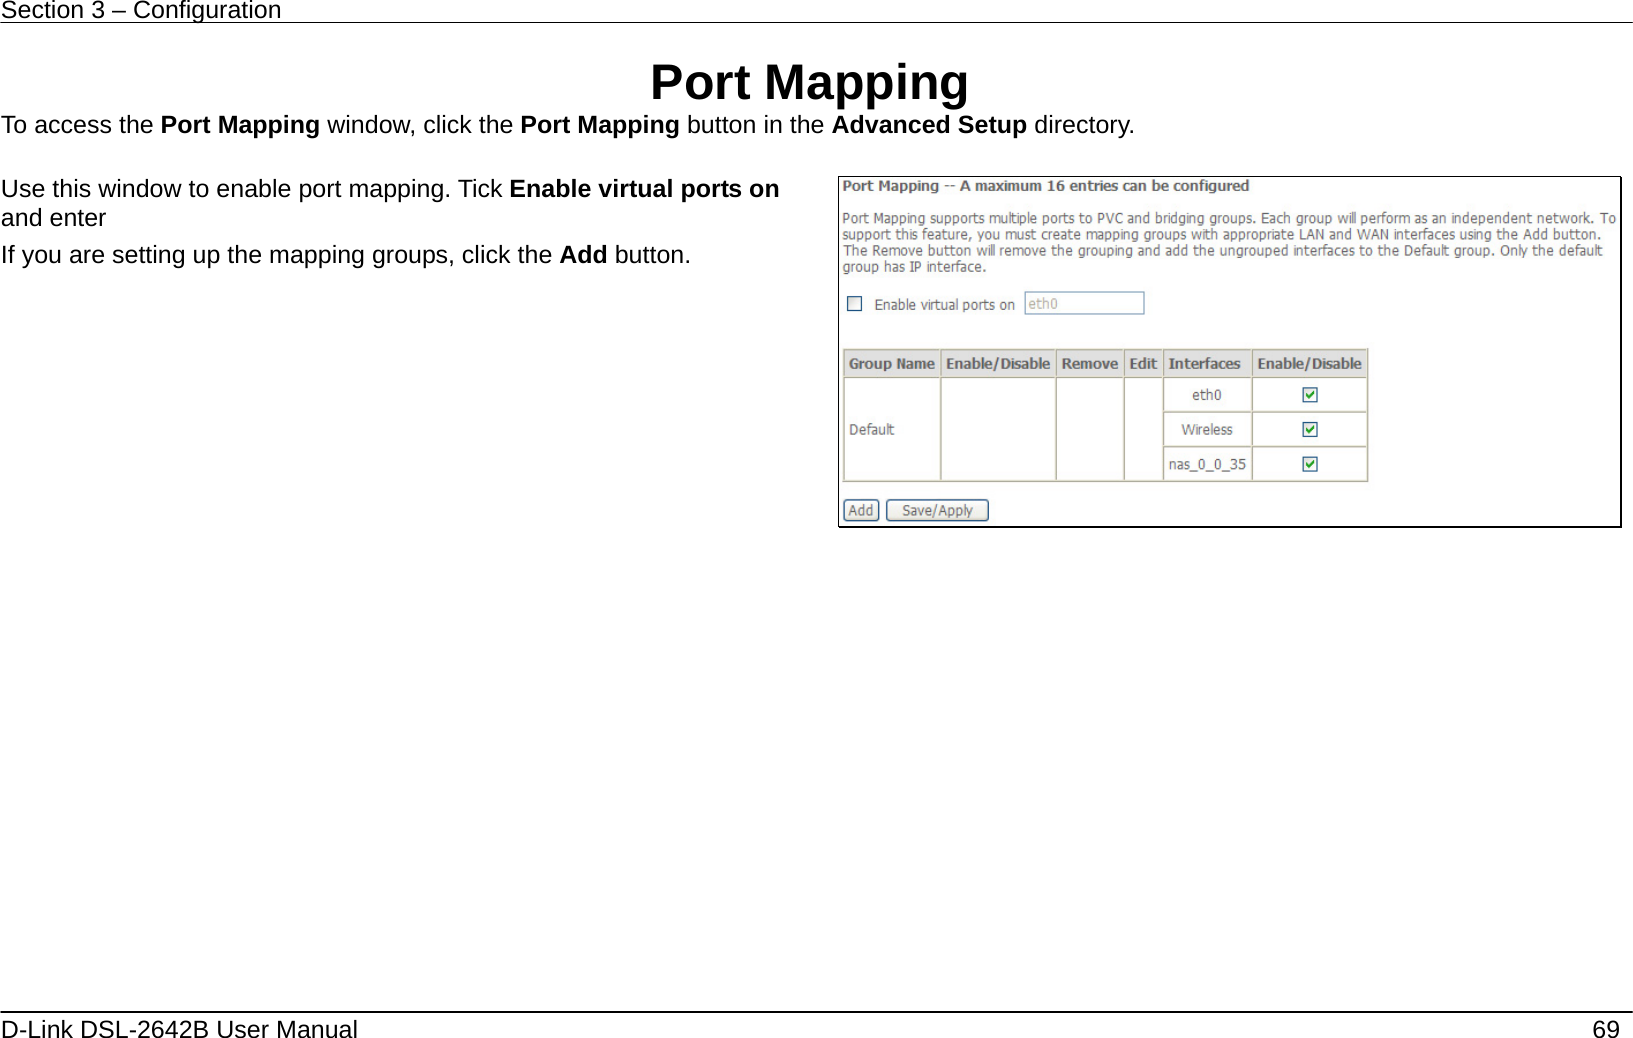 Section 3 – Configuration   D-Link DSL-2642B User Manual    69 Port Mapping To access the Port Mapping window, click the Port Mapping button in the Advanced Setup directory.  Use this window to enable port mapping. Tick Enable virtual ports on and enter   If you are setting up the mapping groups, click the Add button.       